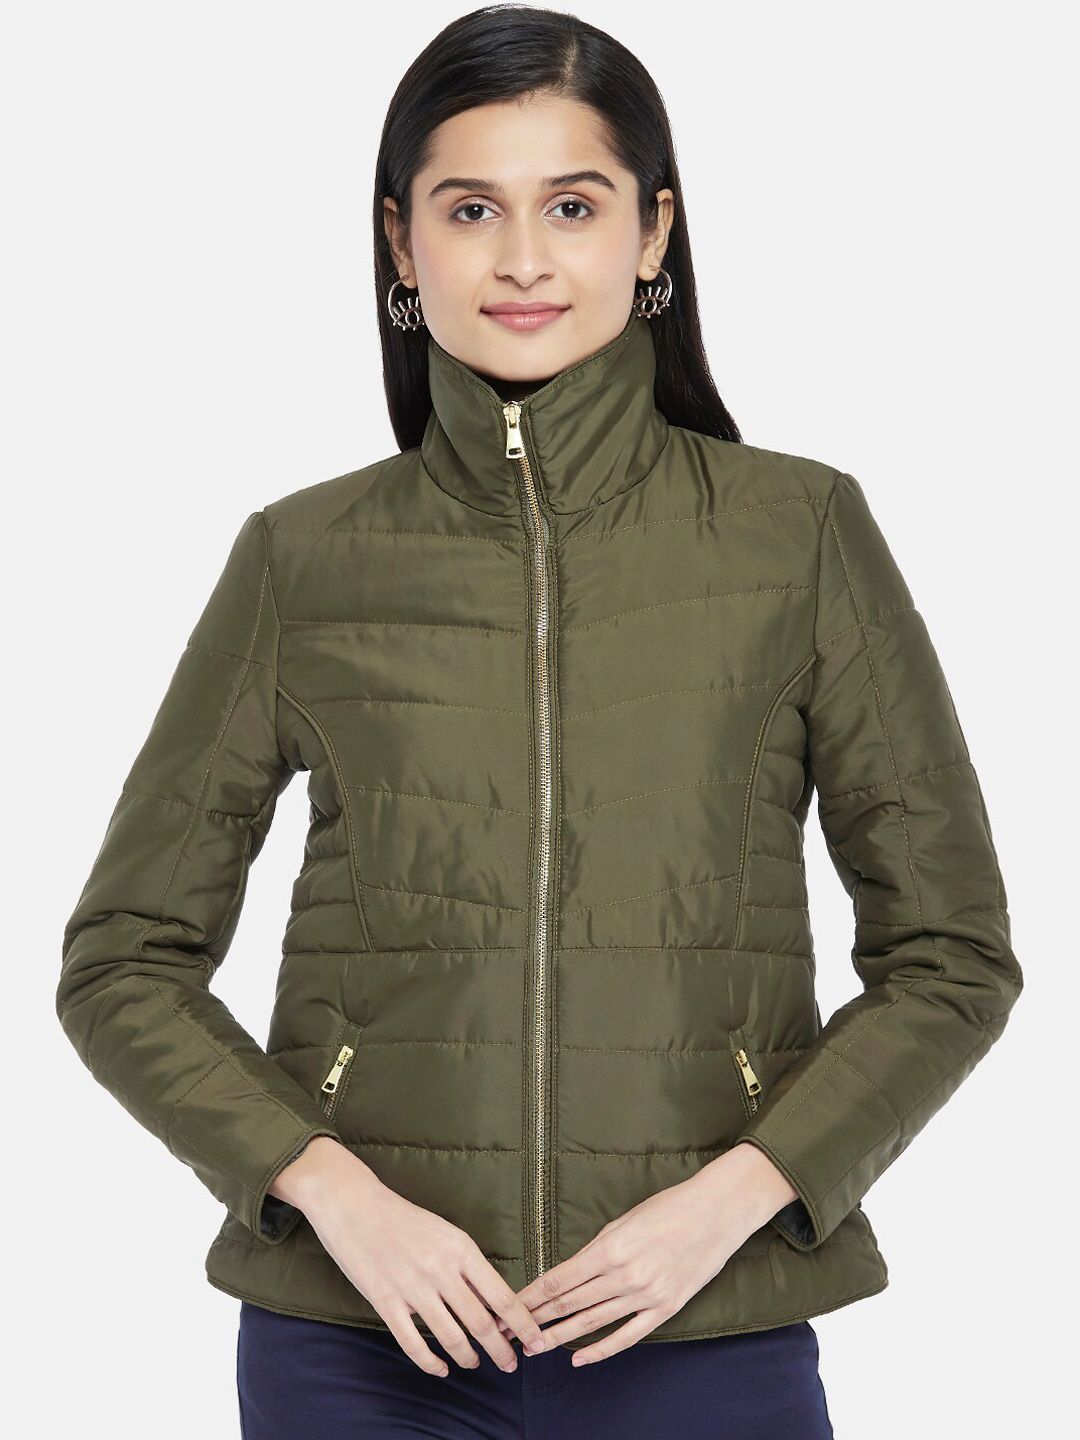 Honey by Pantaloons Women Olive Green Tailored Jacket Price in India